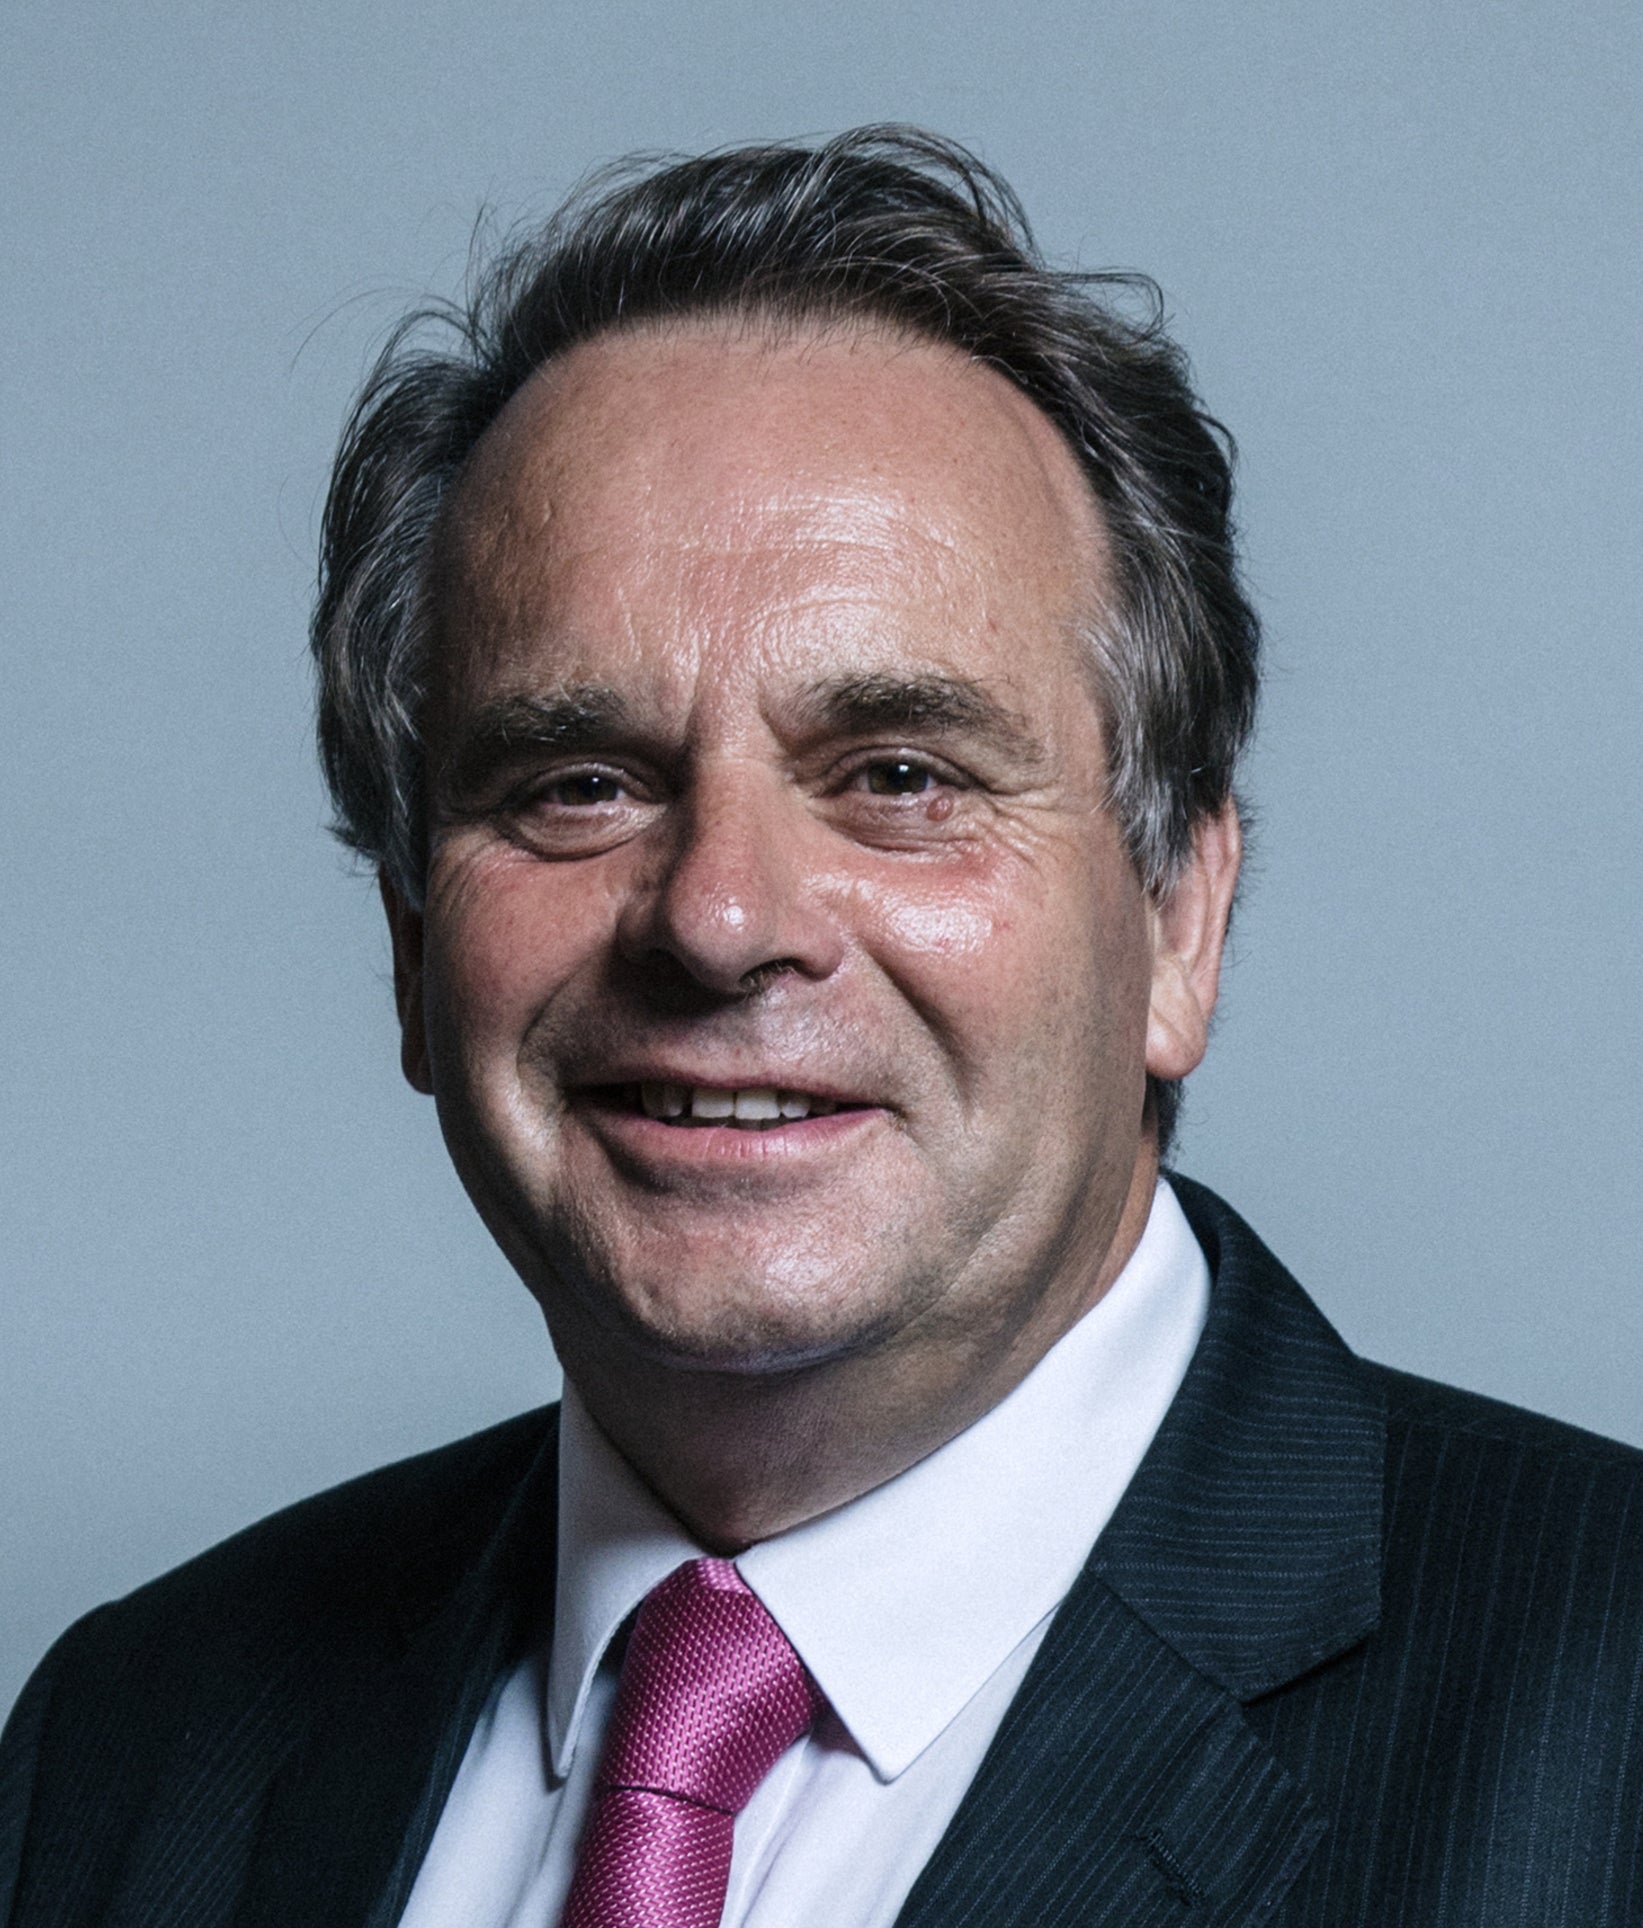 Disgraced politician Neil Parish has not ruled out running against his old colleagues in the Tory party in the by-election triggered by his resignation for watching pornography in Parliament